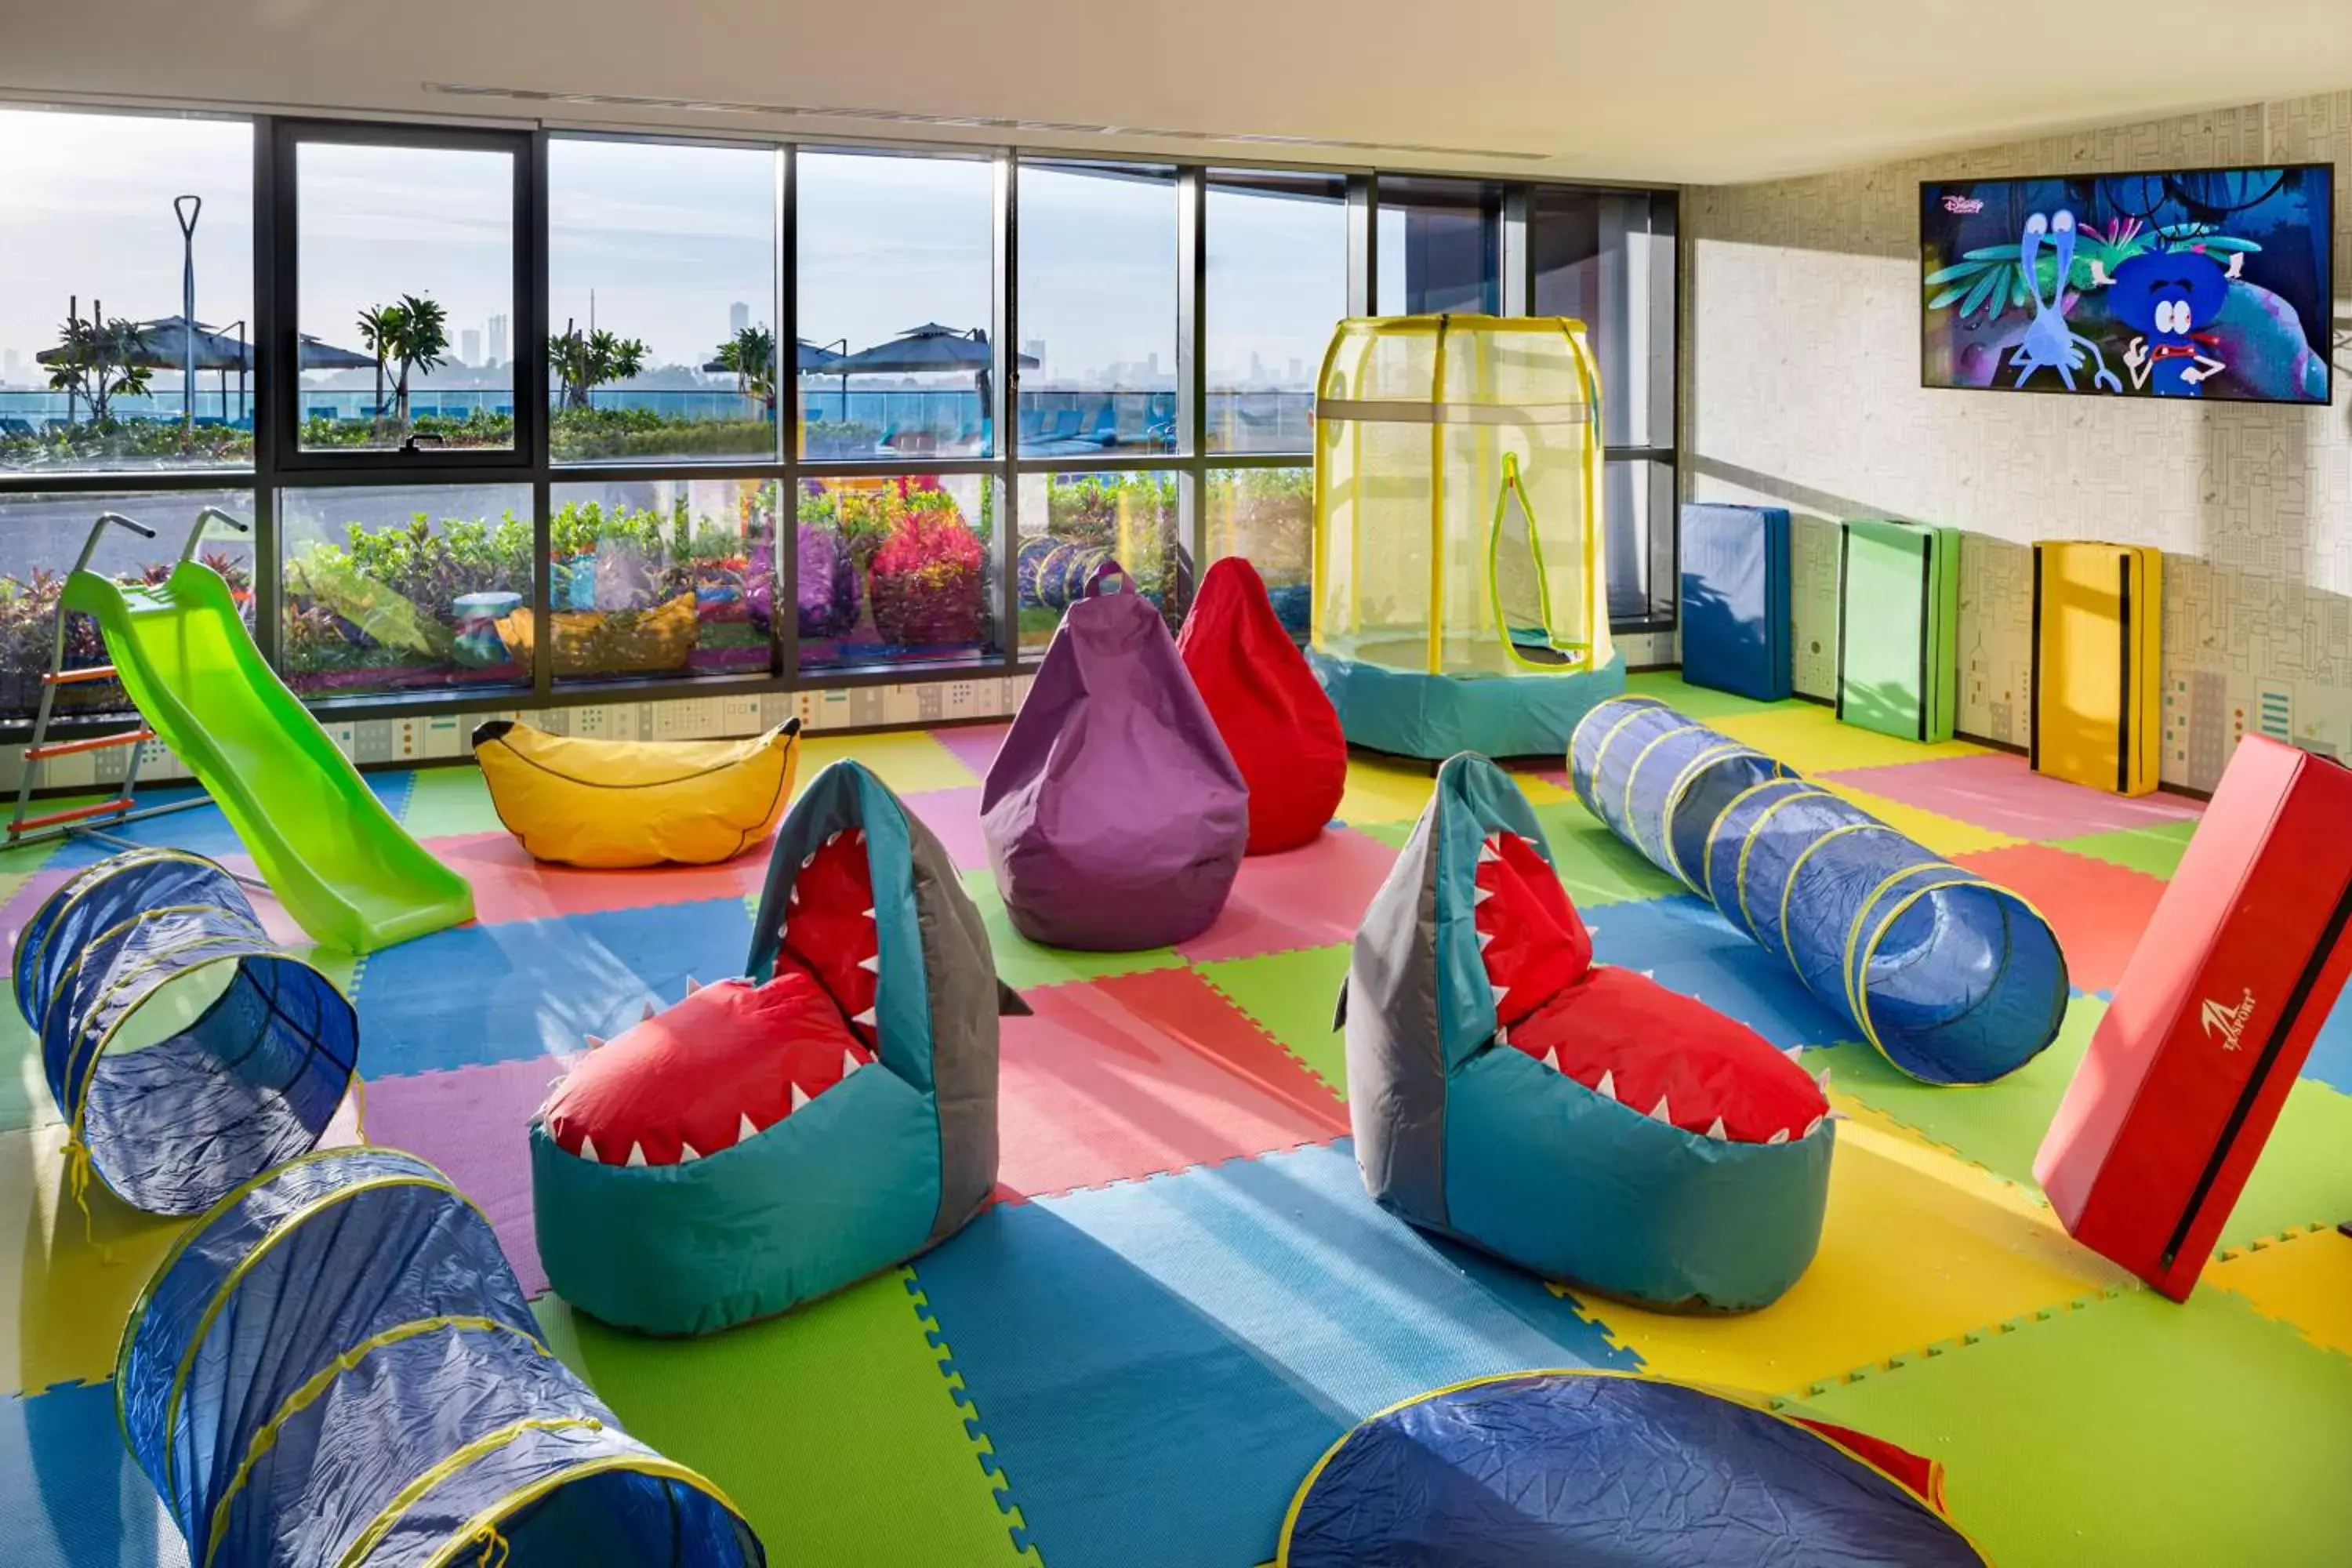 Kids's club in Millennium Place Barsha Heights Hotel Apartments